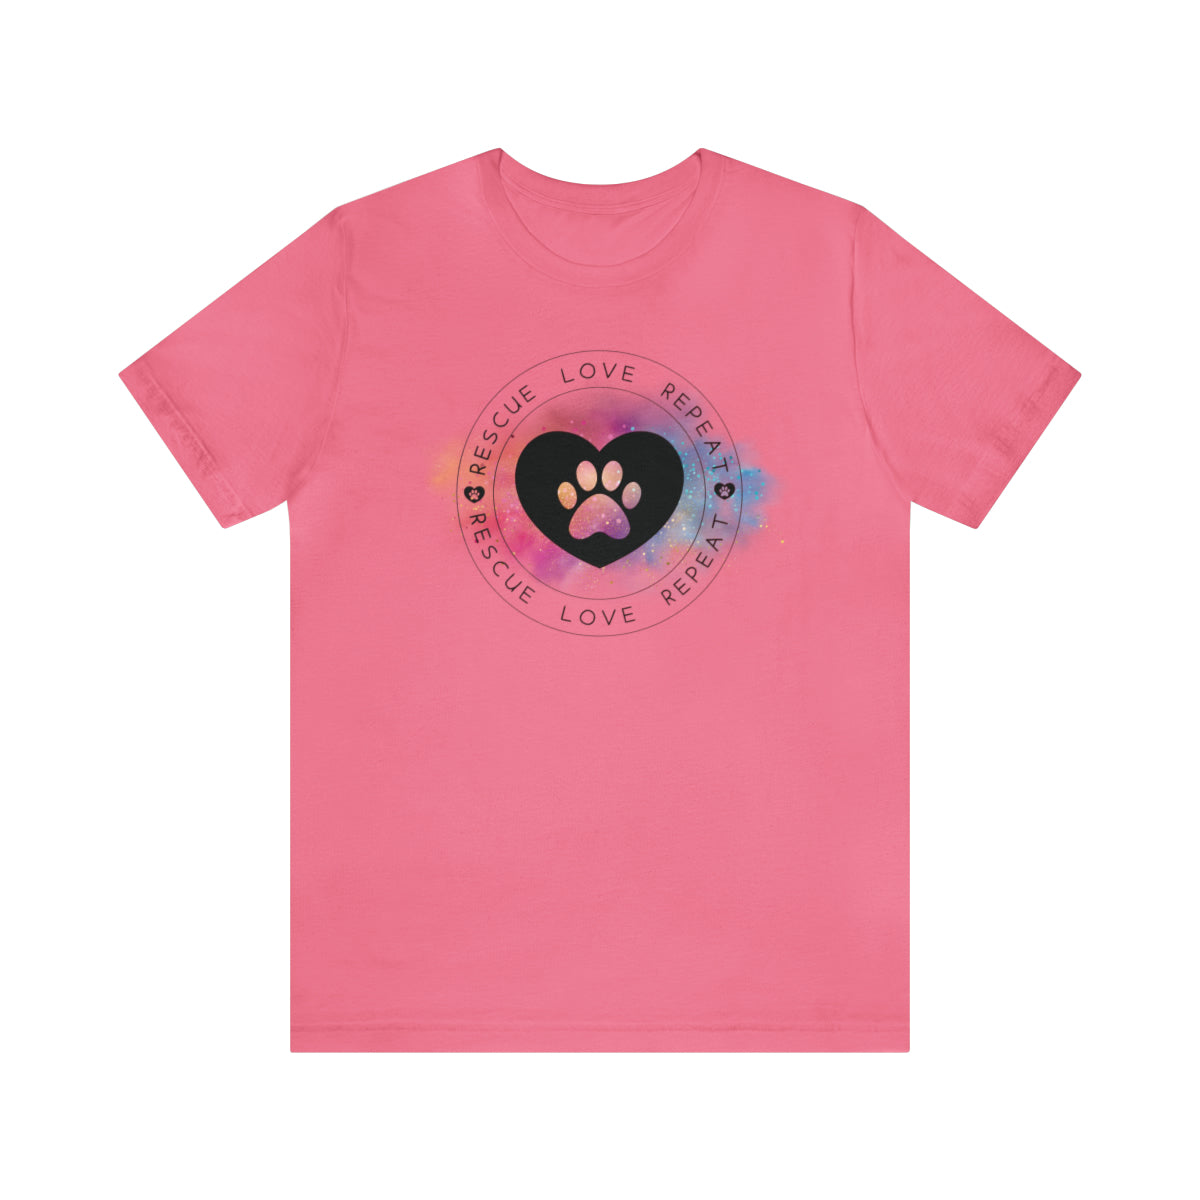 Rescue Love Repeat Heart Paw Unisex Jersey Short Sleeve Tee